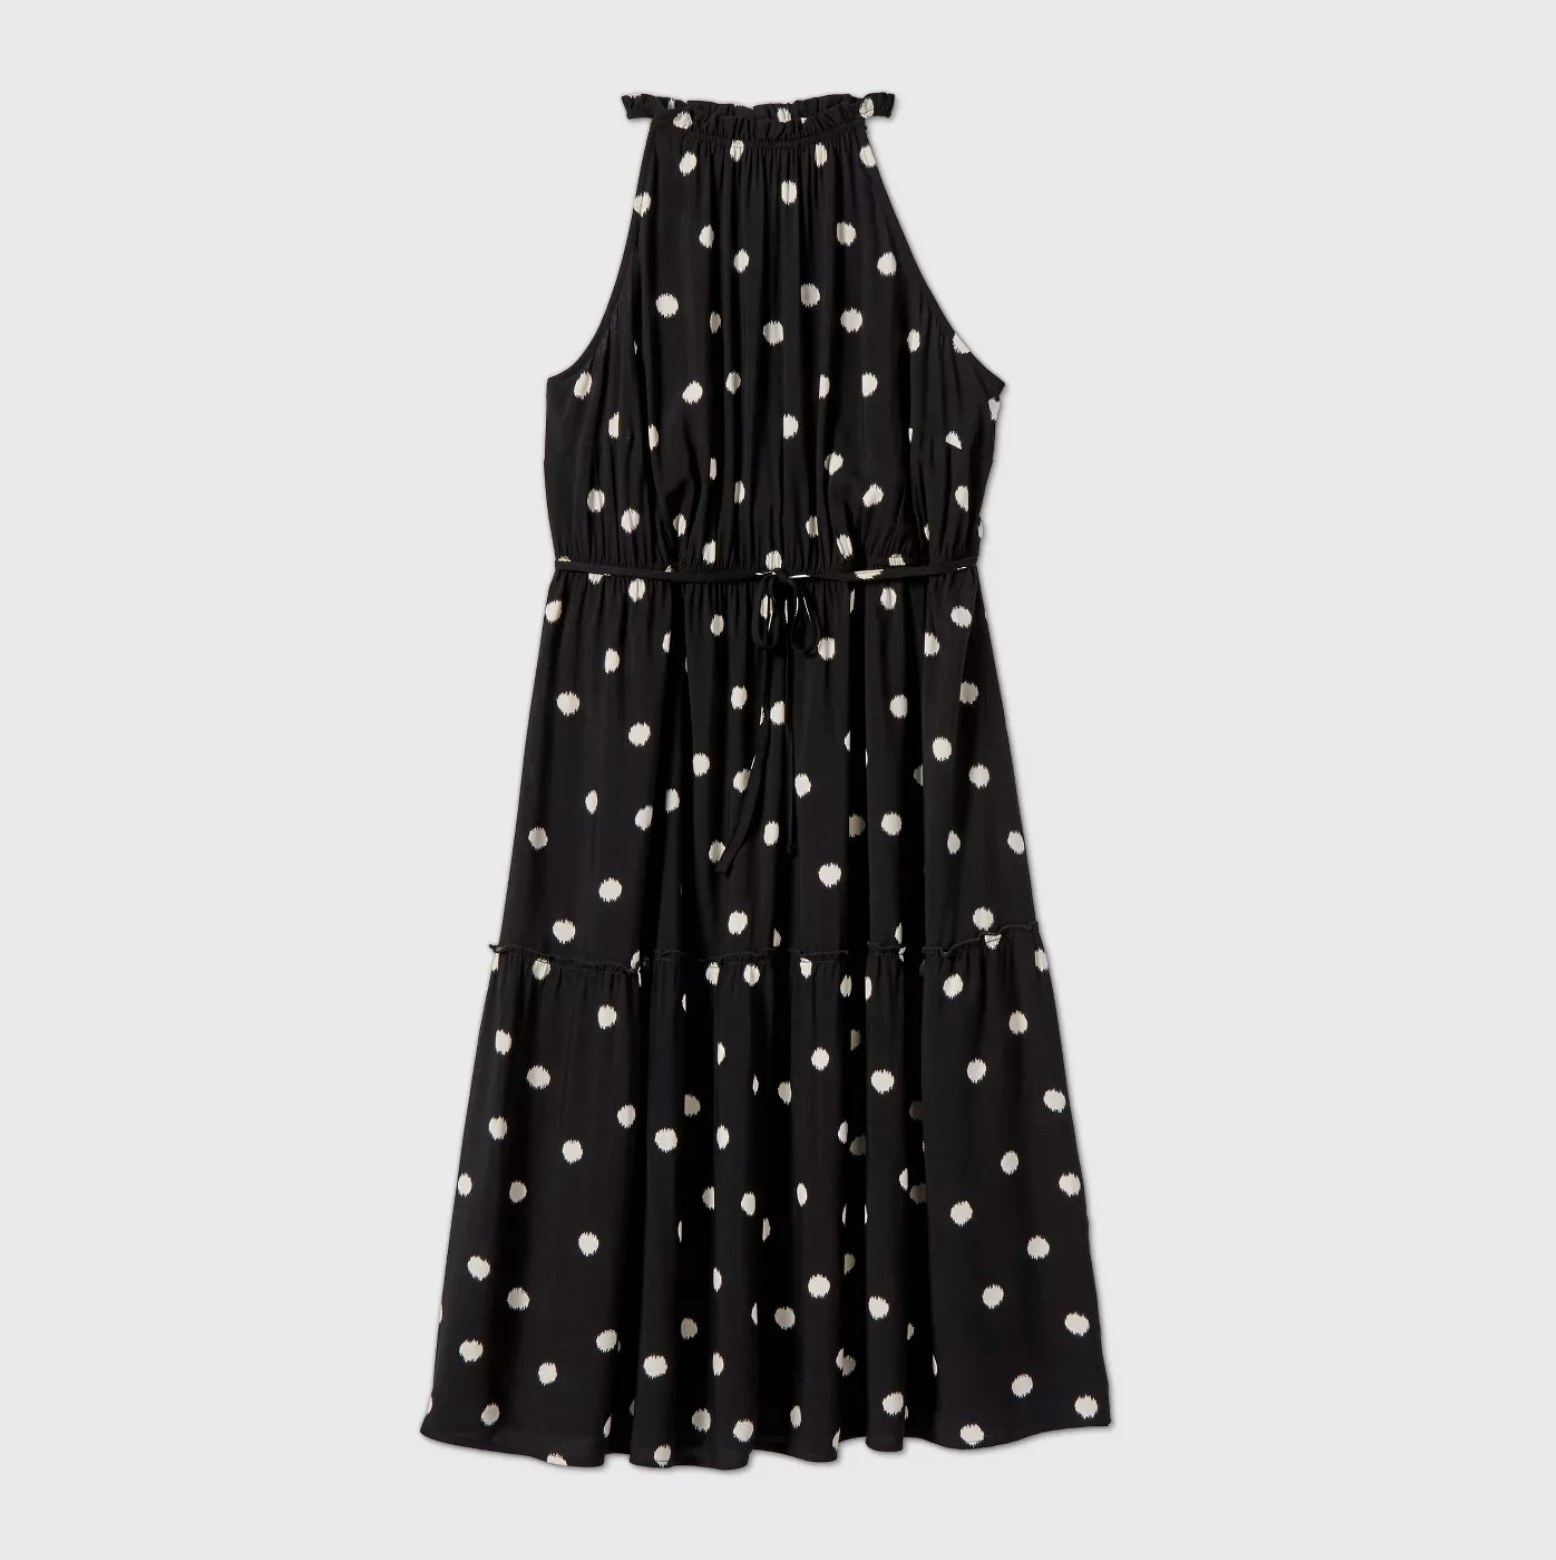 An image of a midi-length black sleeveless dress with white polka dots and a halter neckline